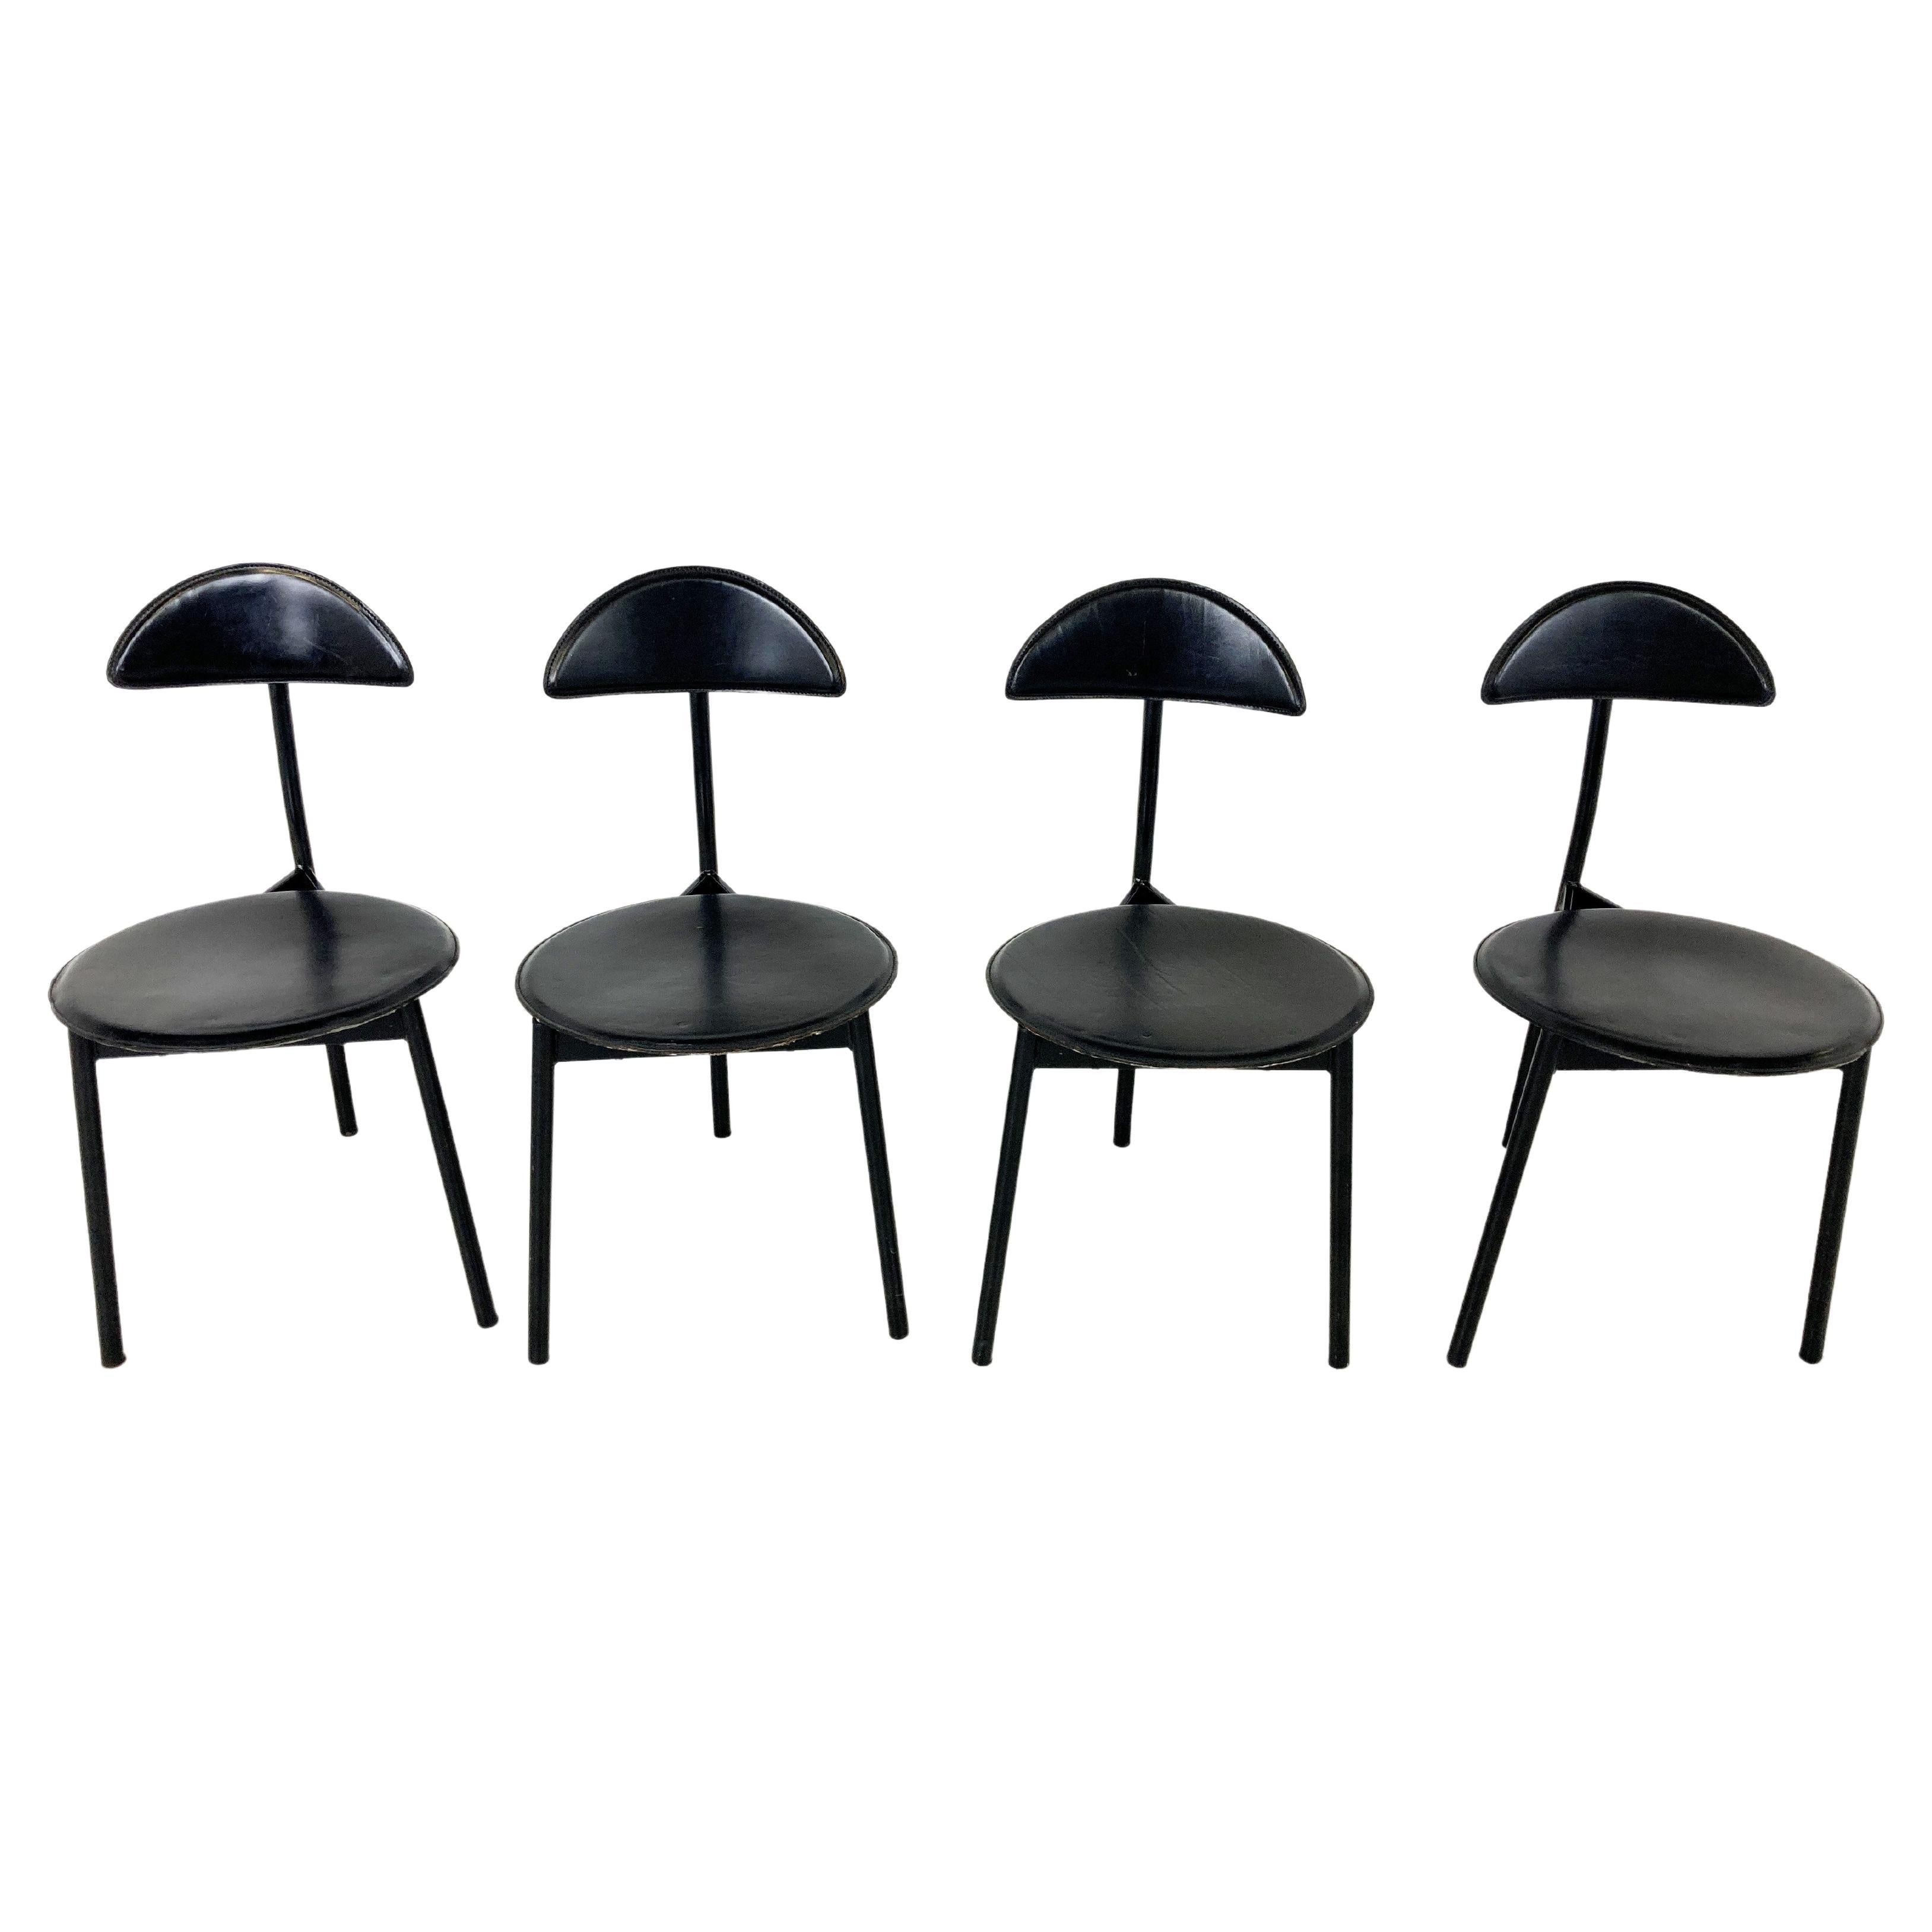 Set of 4 Post Modern Dining Chairs by Linea Veam, 1980s For Sale